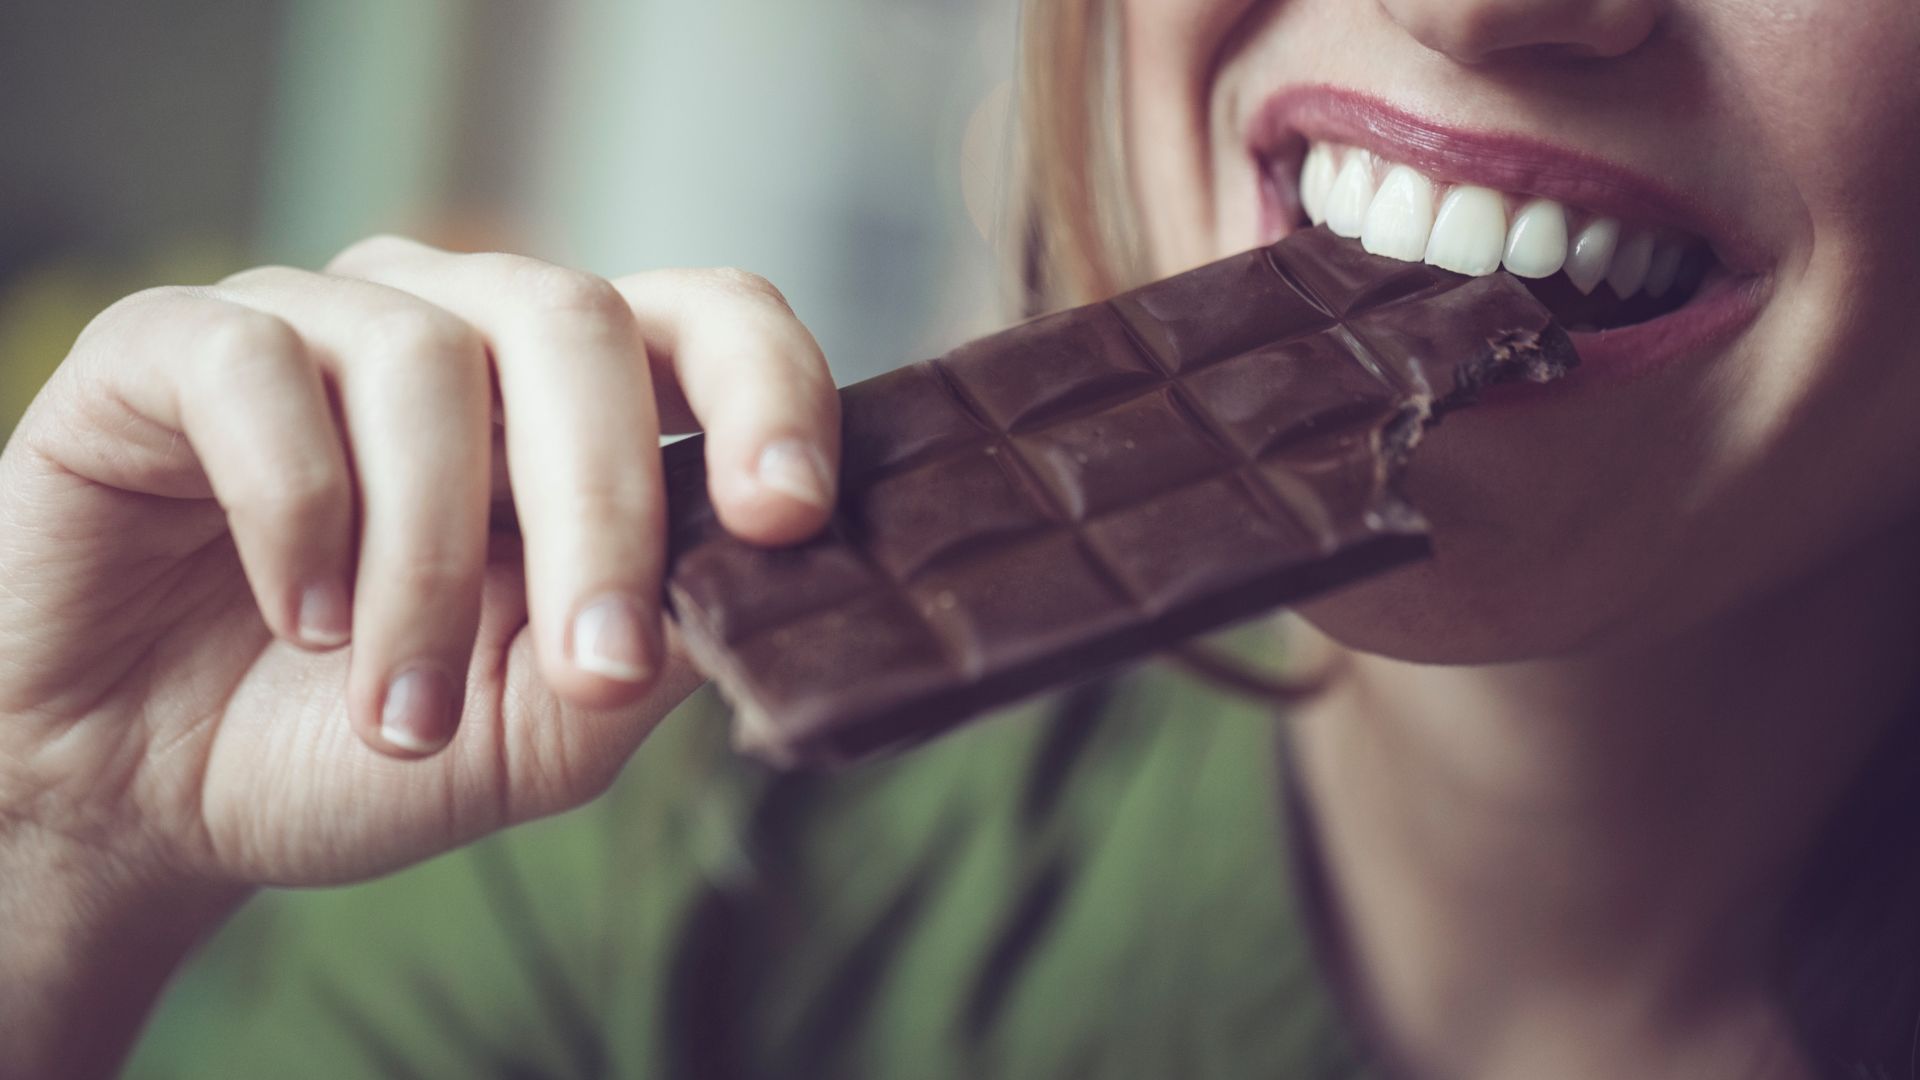 There is a part of chocolate that never touches your tongue